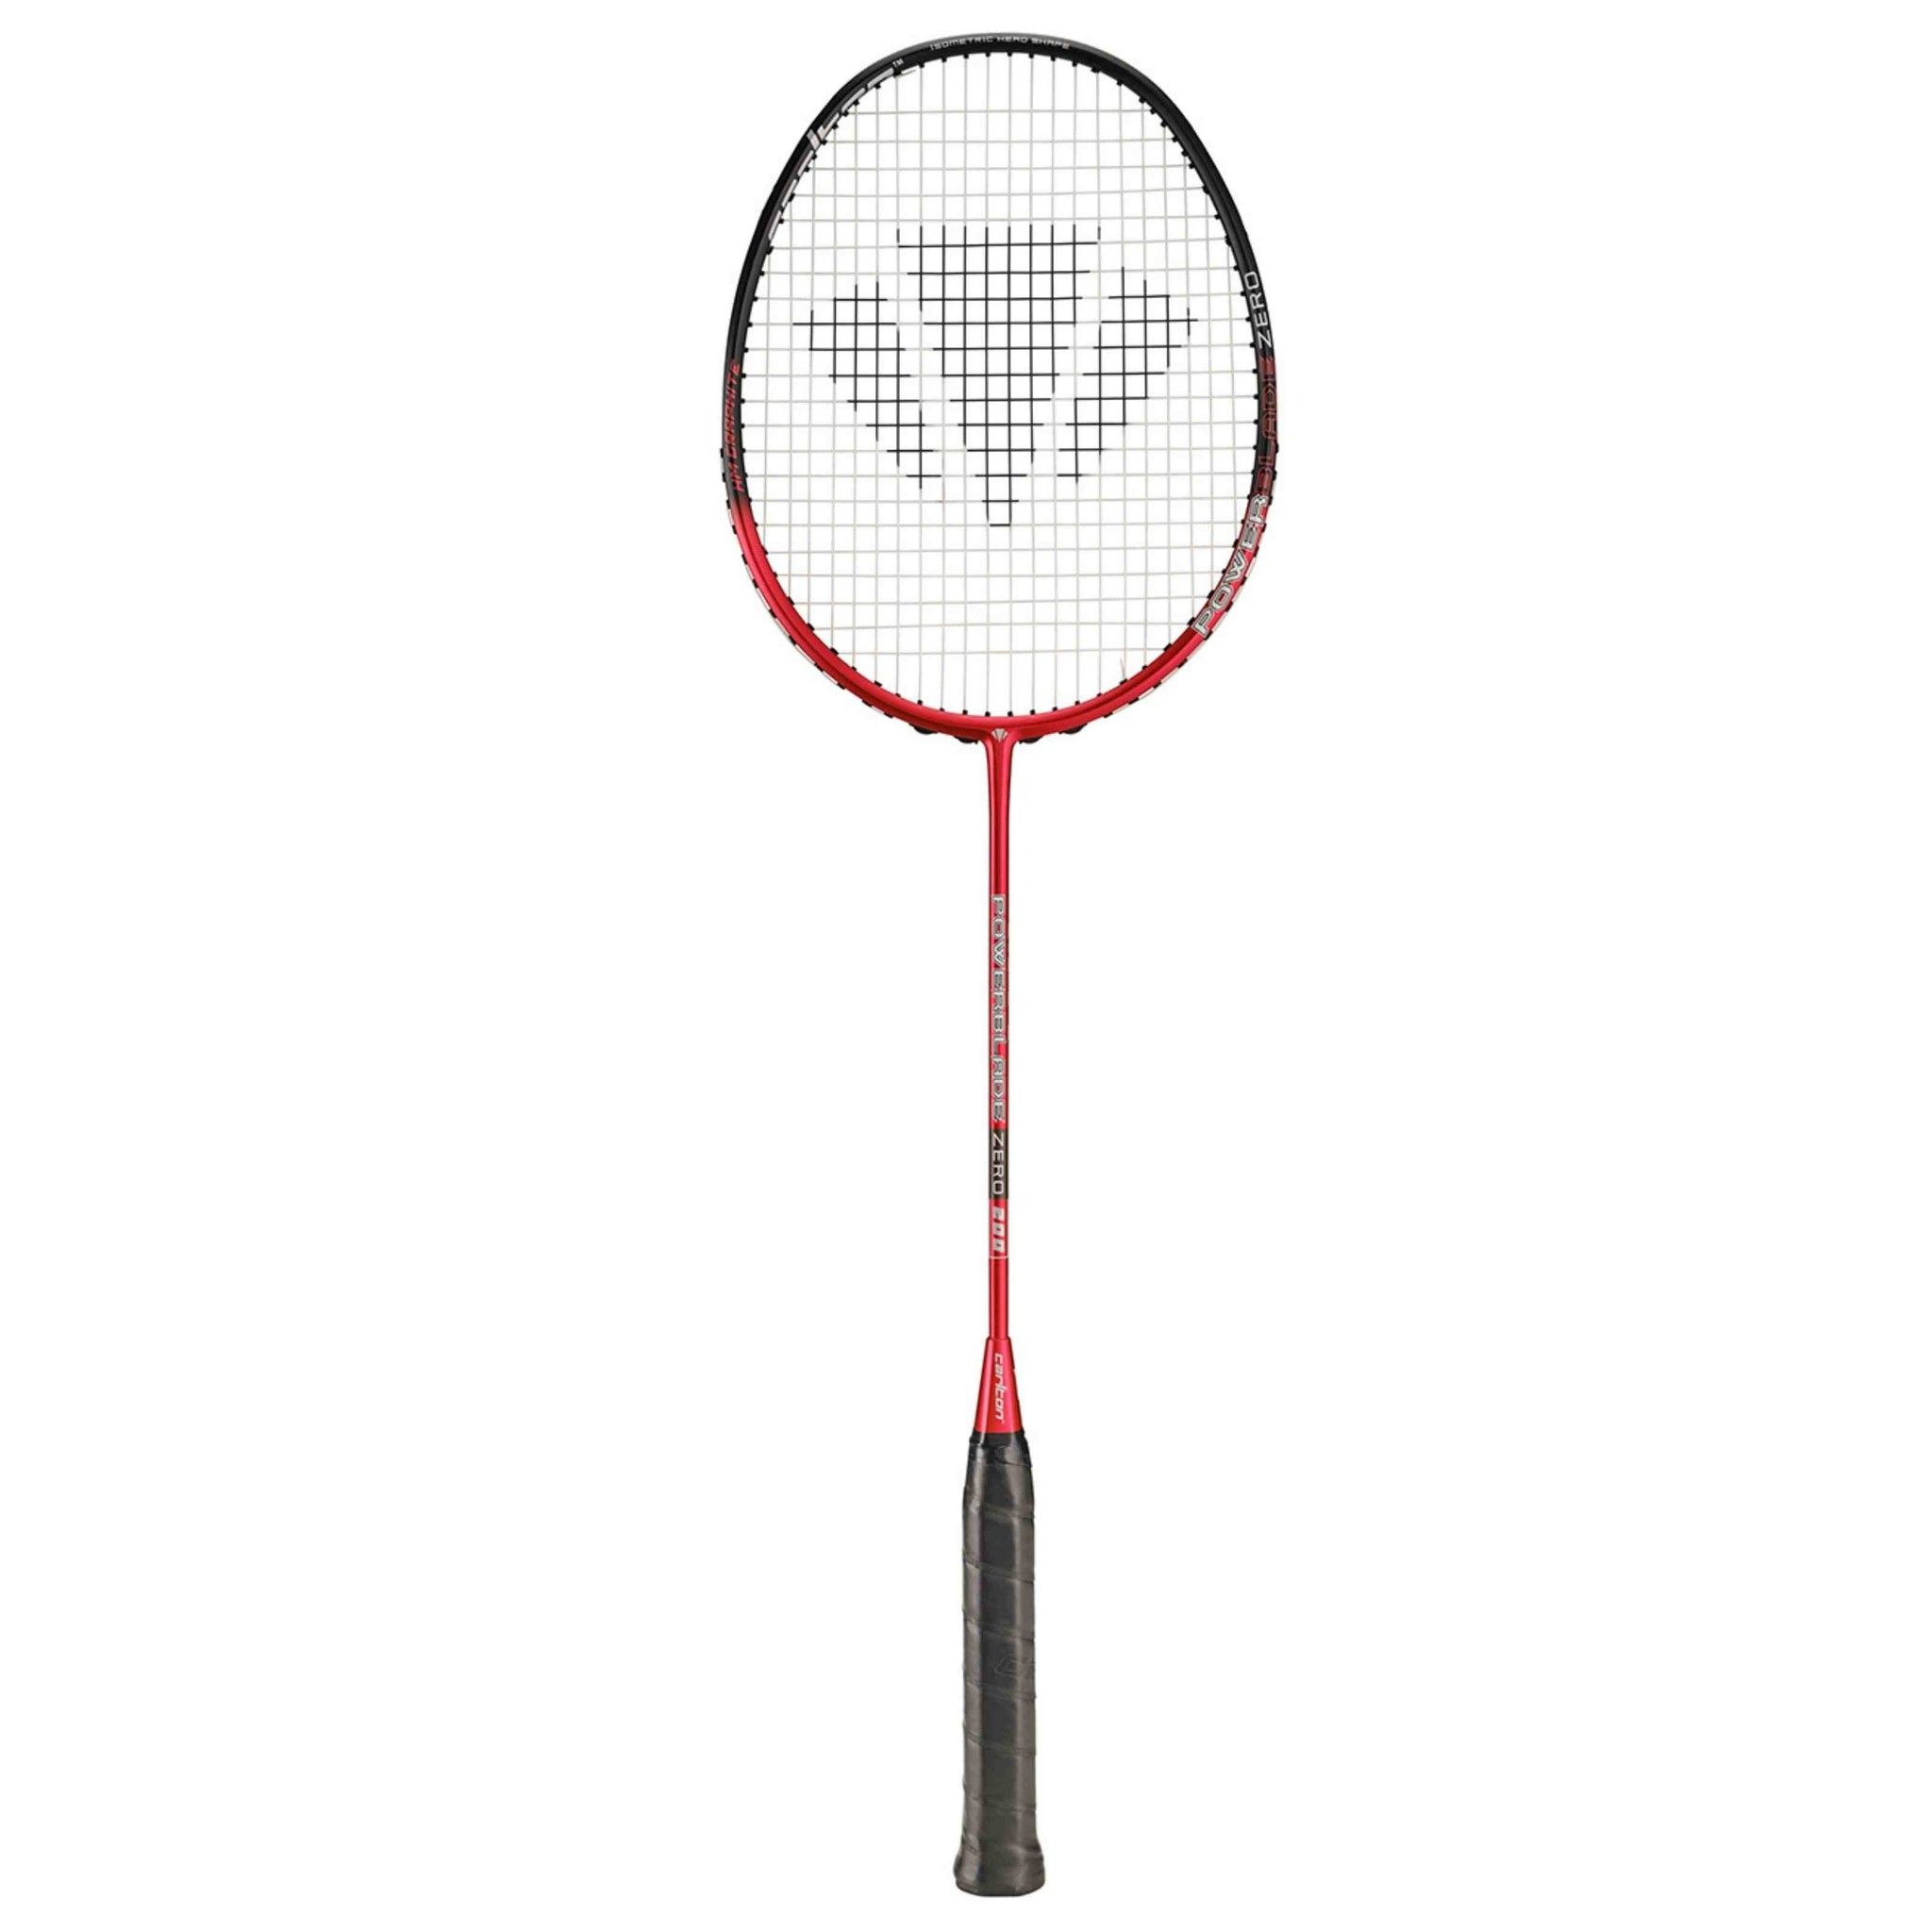 What are the top 5 badminton rackets for beginners?